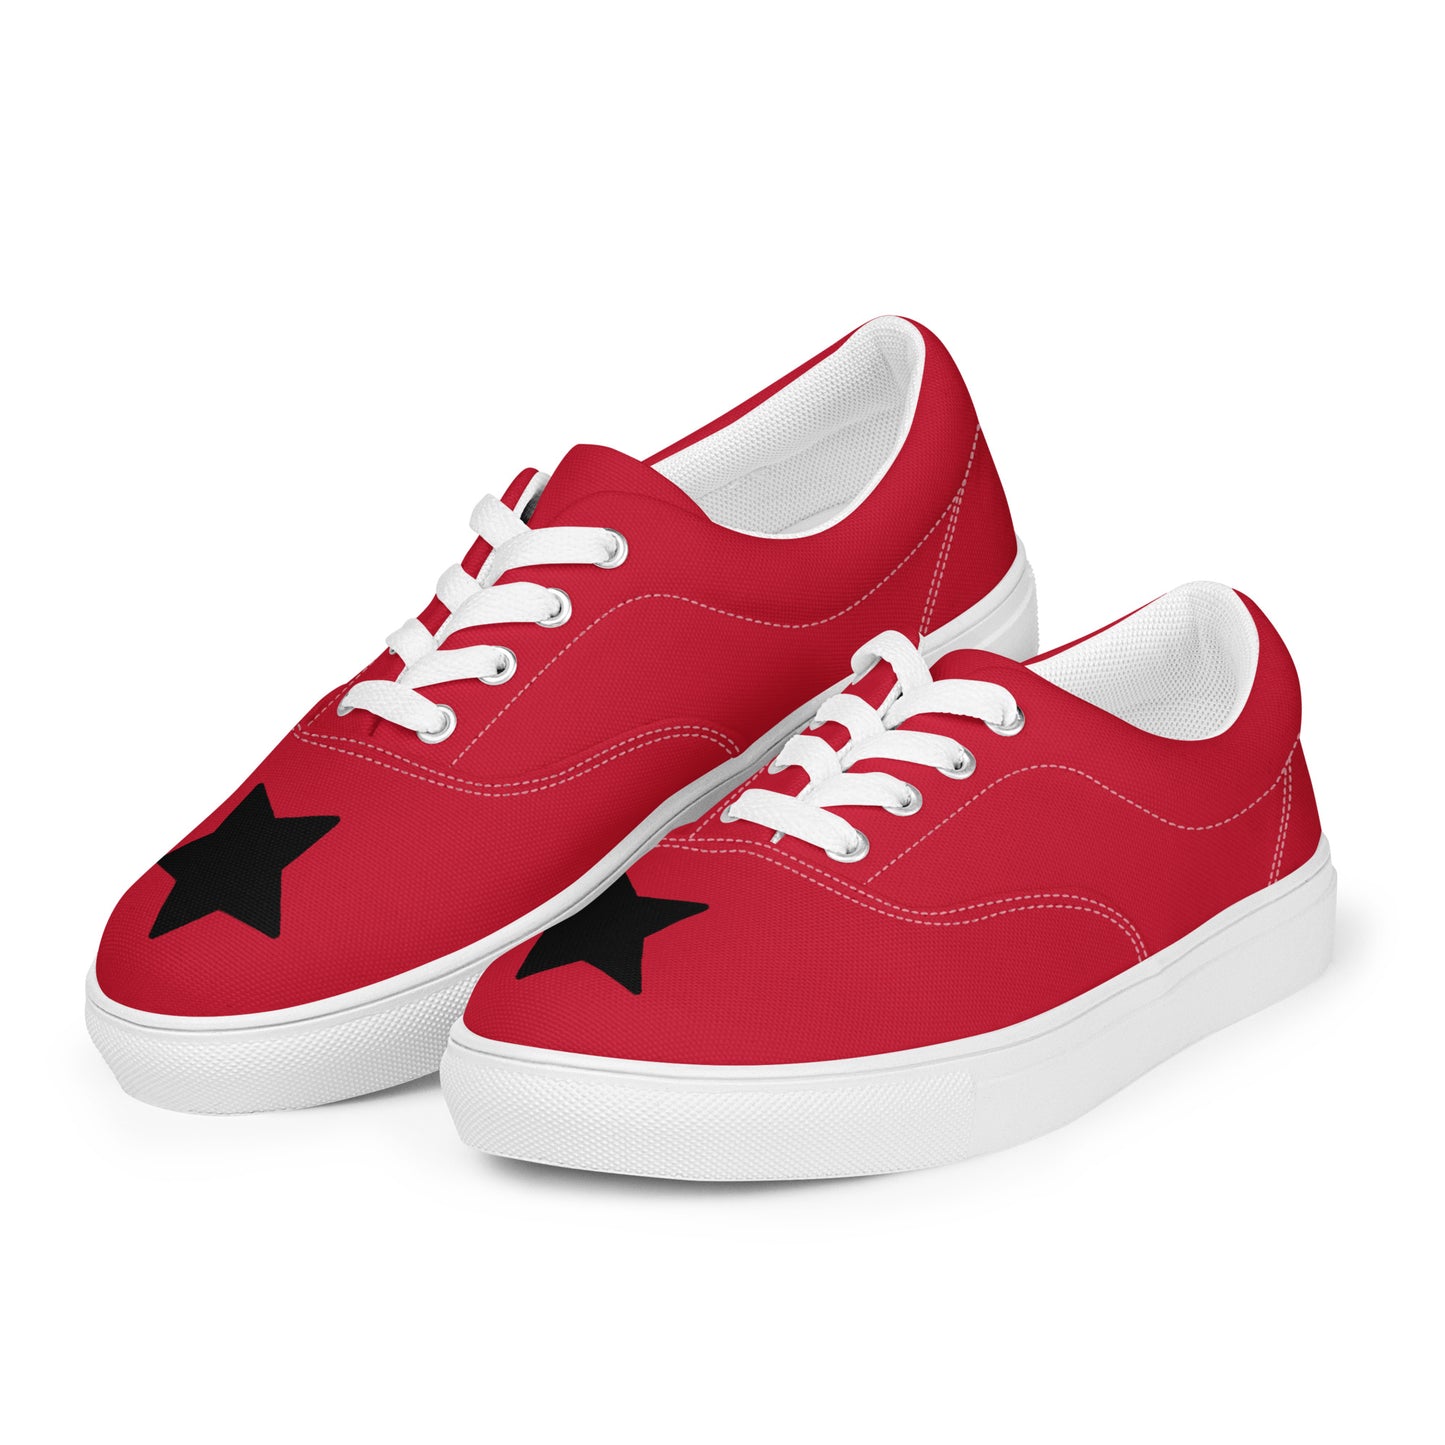 Women’s Black Star Red Lace-up Canvas Shoes